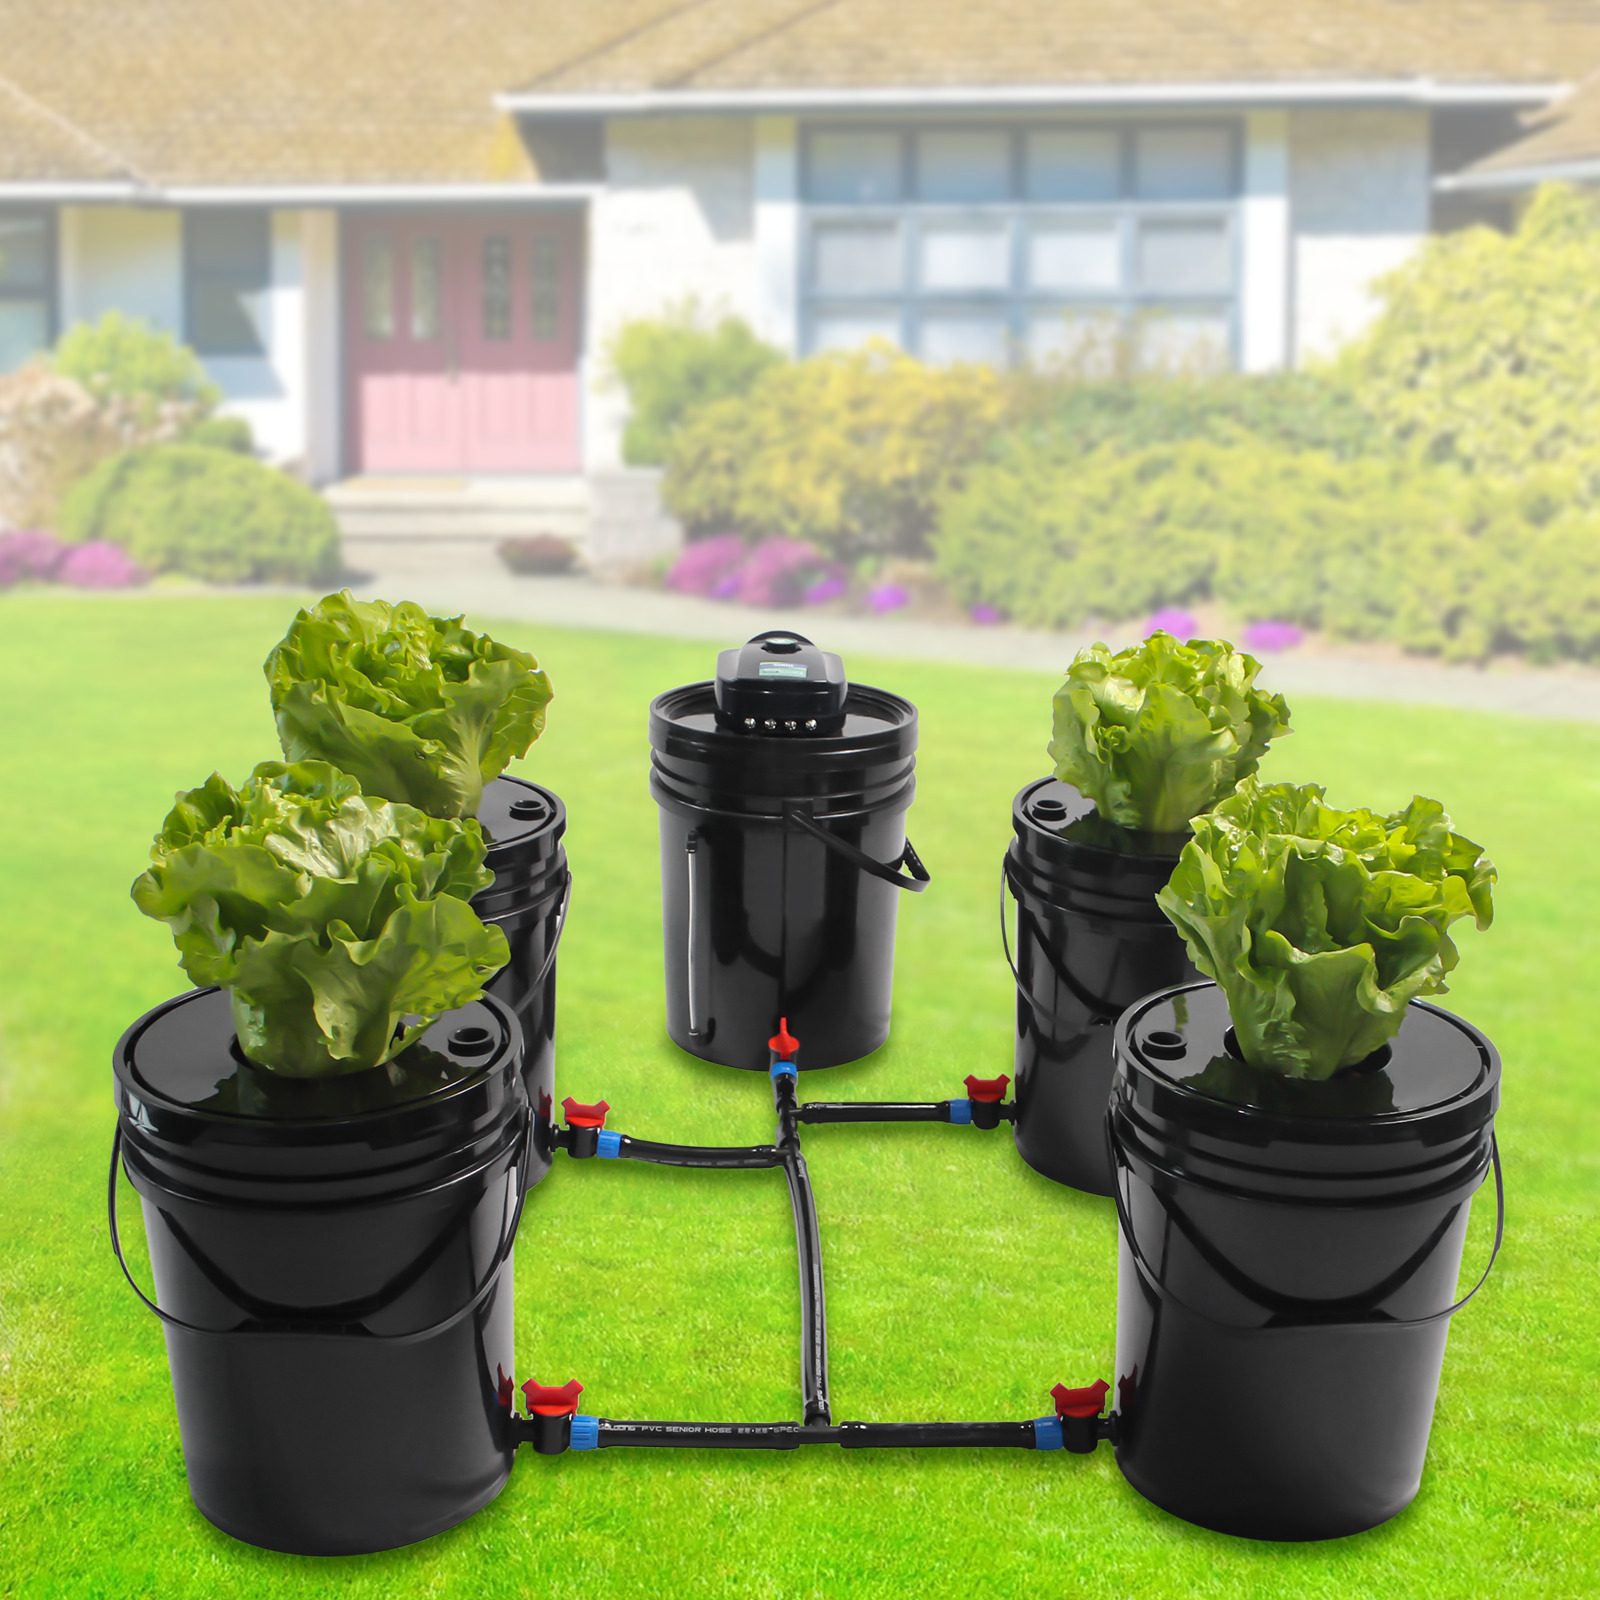 Set of 5 Deep Water Culture DWC Hydroponic Grow System Kit 5 Gallon Round Bucket